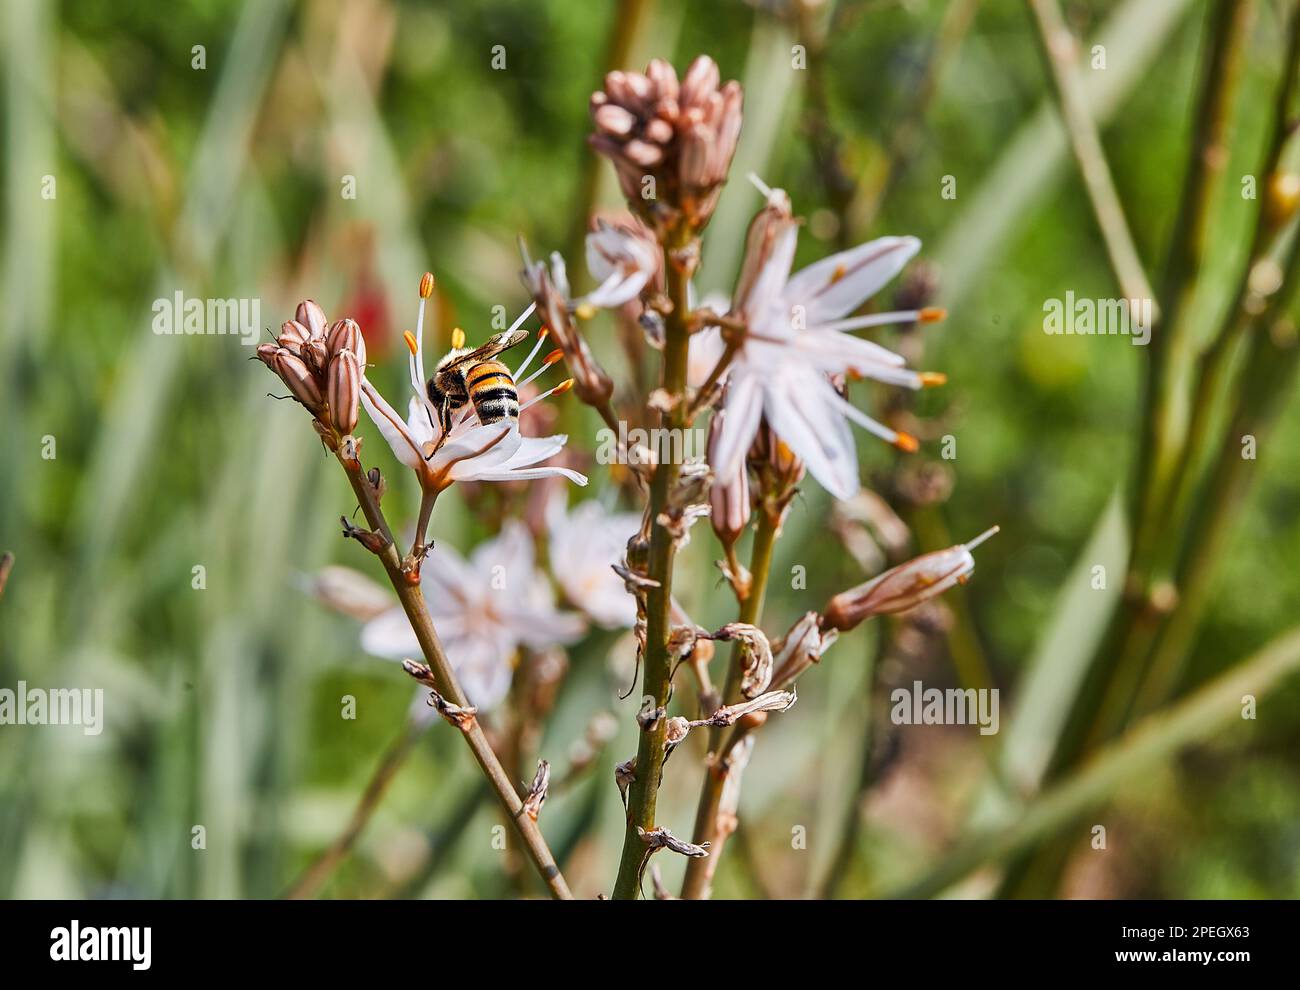 Branched Asphodel: A species of asphodel also known as King's Wand, King's Staff and Small Asphodel, its botanical name is Asphodelus Ramosus. Bee on Stock Photo